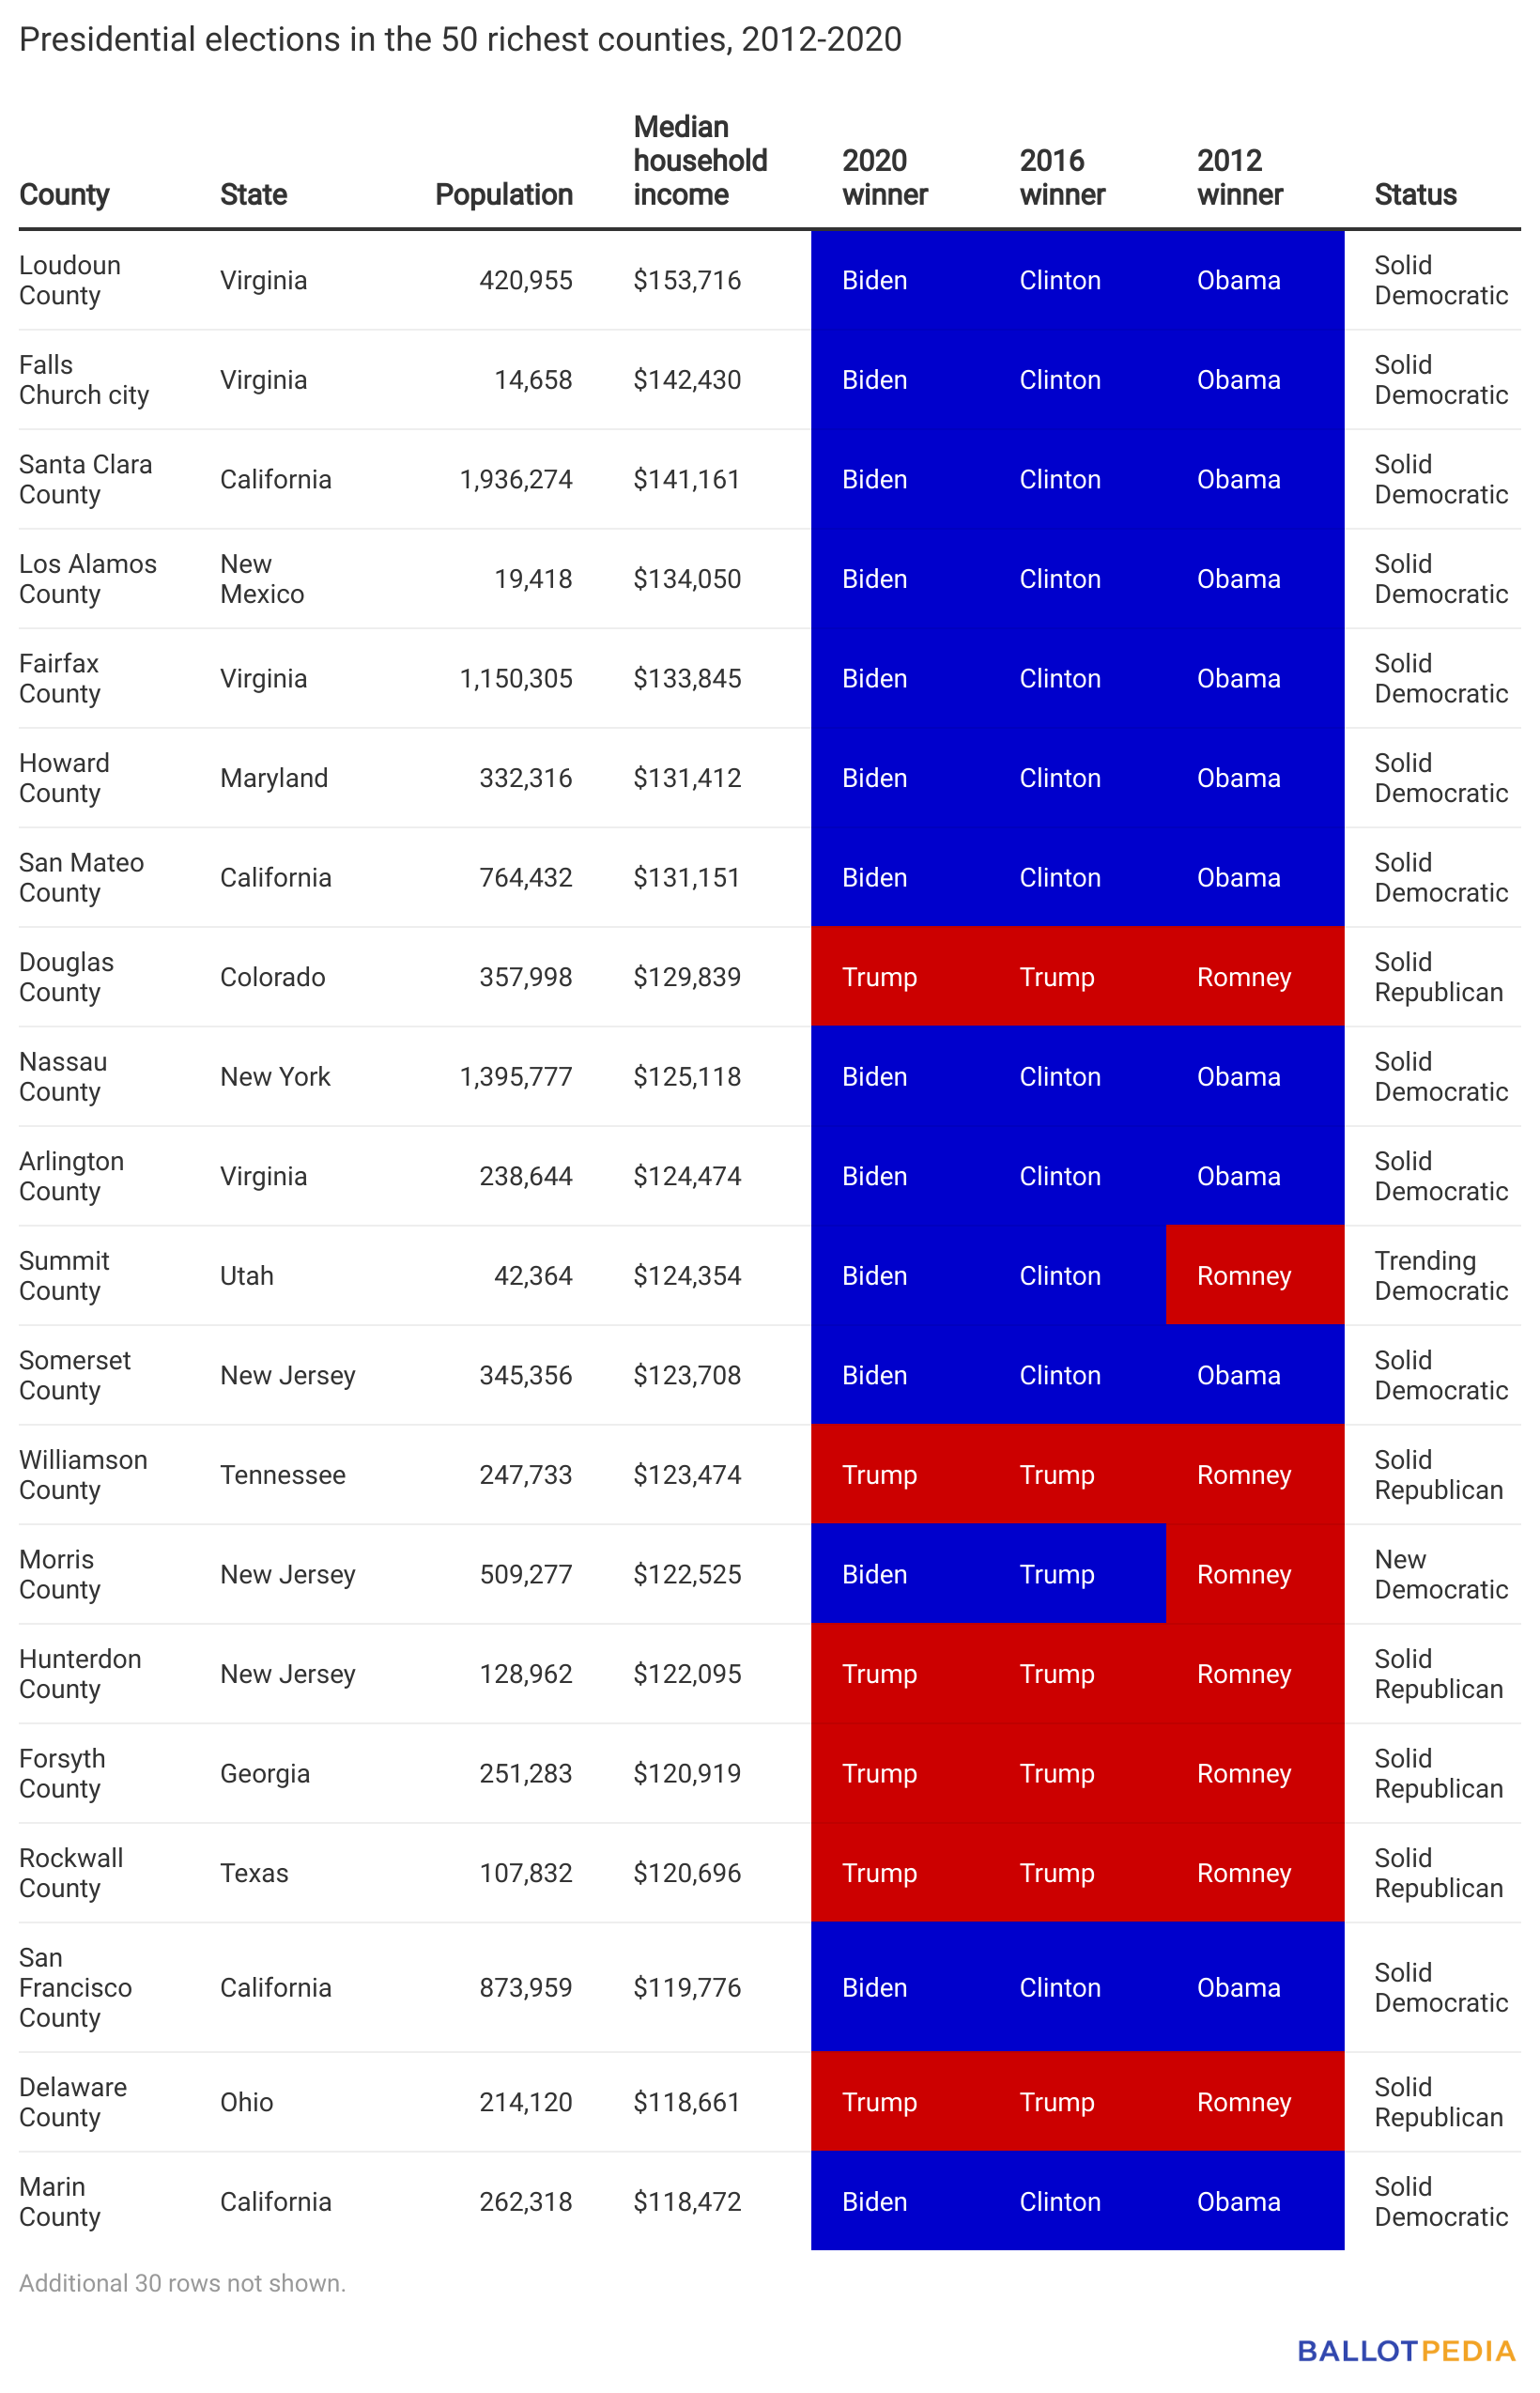  Table showing how richest counties voted in presidential elections in the 50 richest counties.